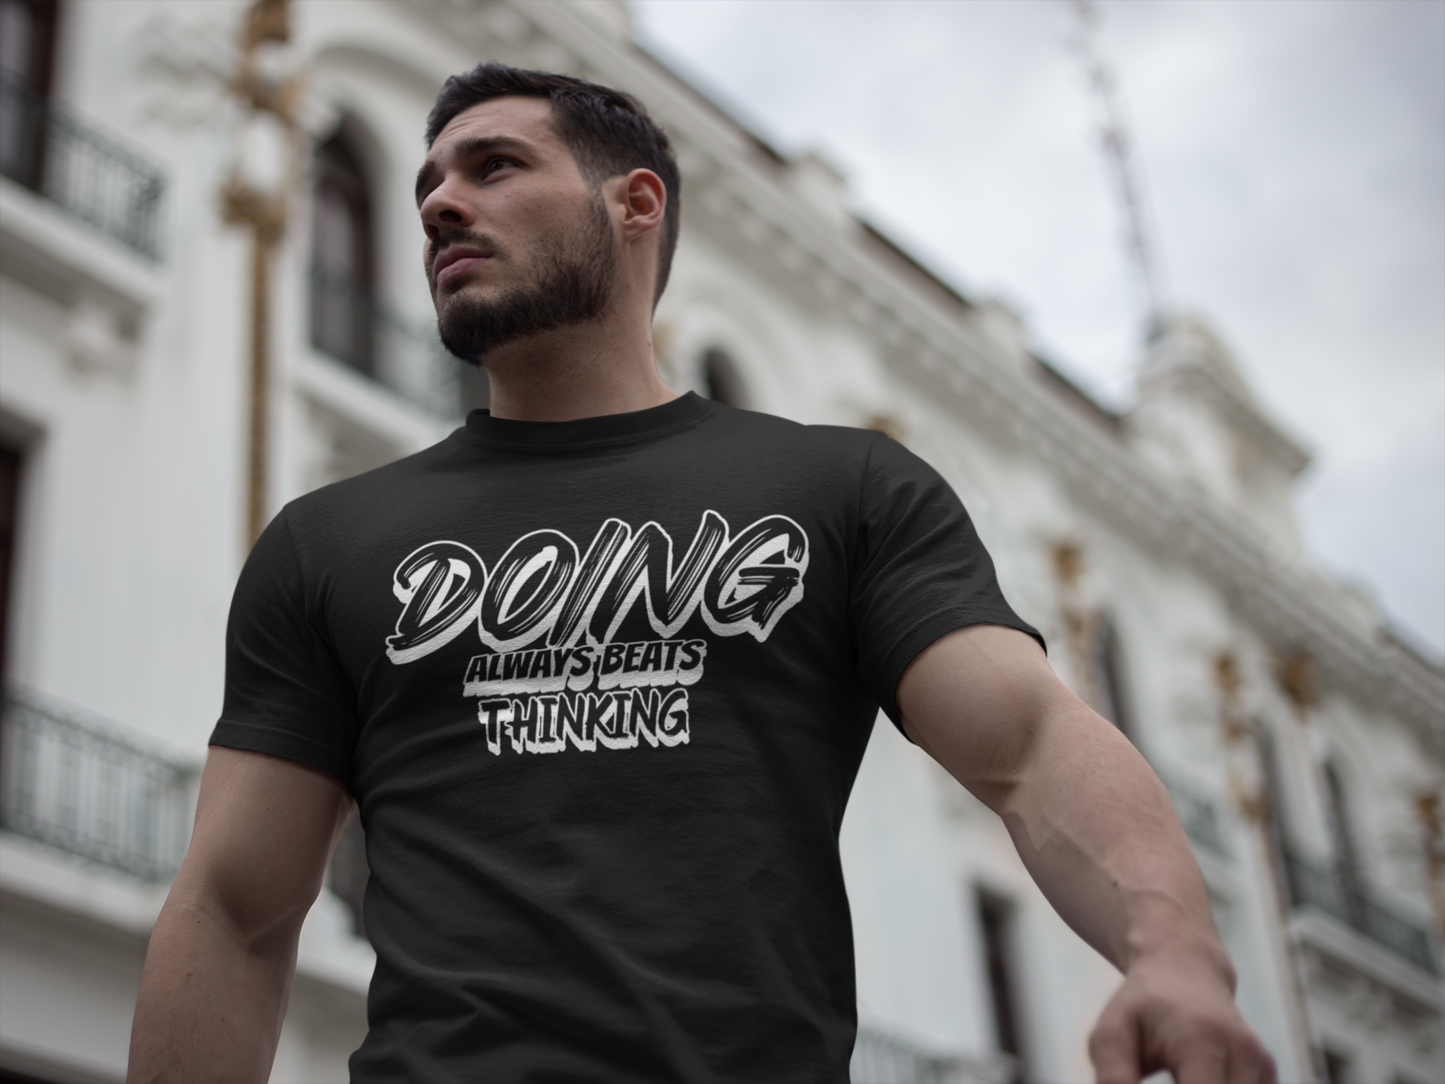 Doing always beats Thinking - motivational quote t shirt for men and women